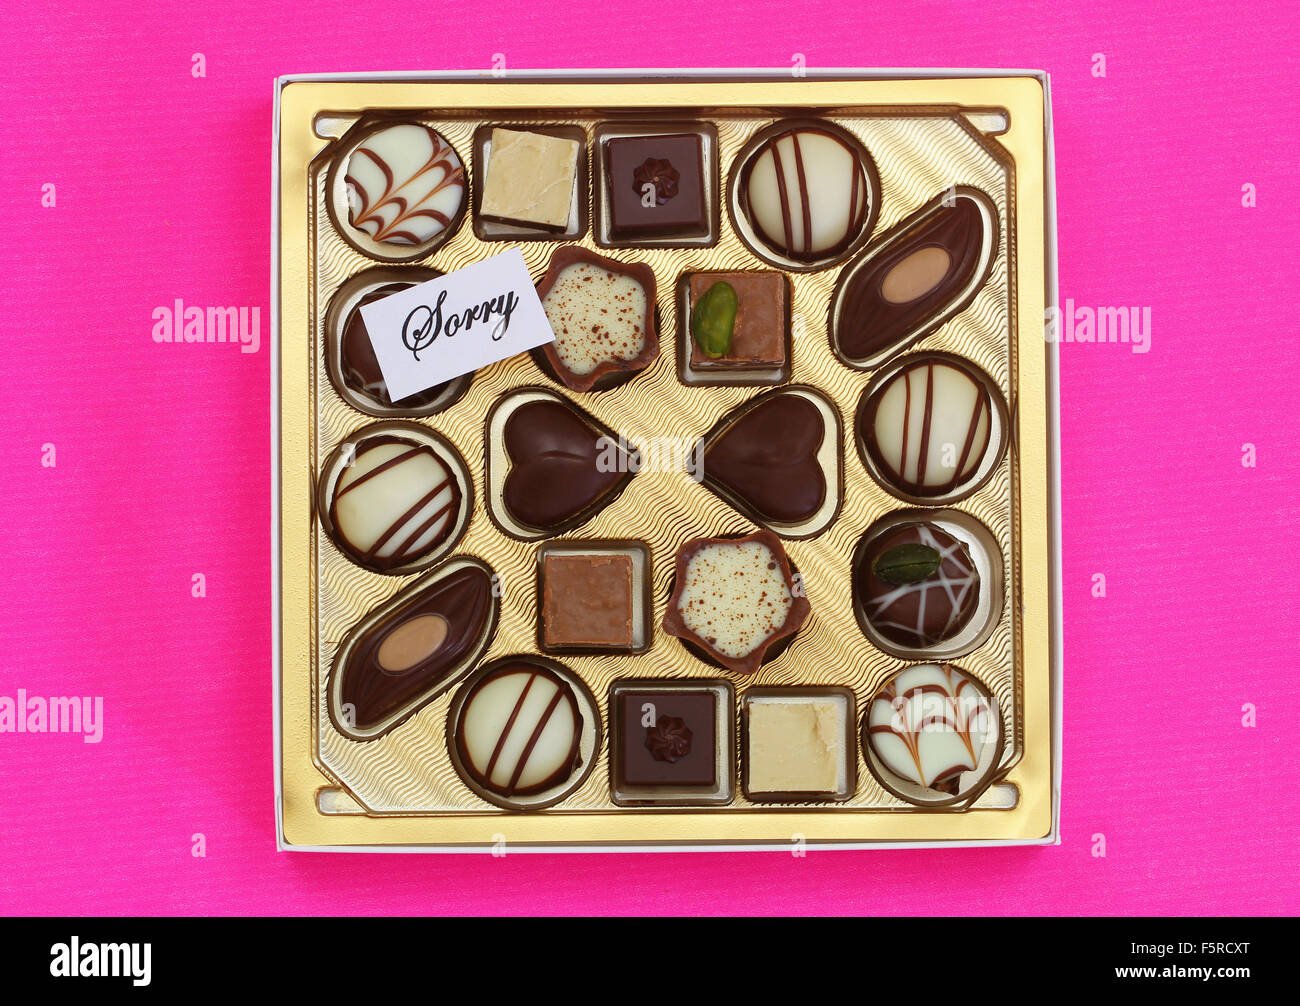 Sorry card with box of assorted chocolates on pink surface Stock Photo